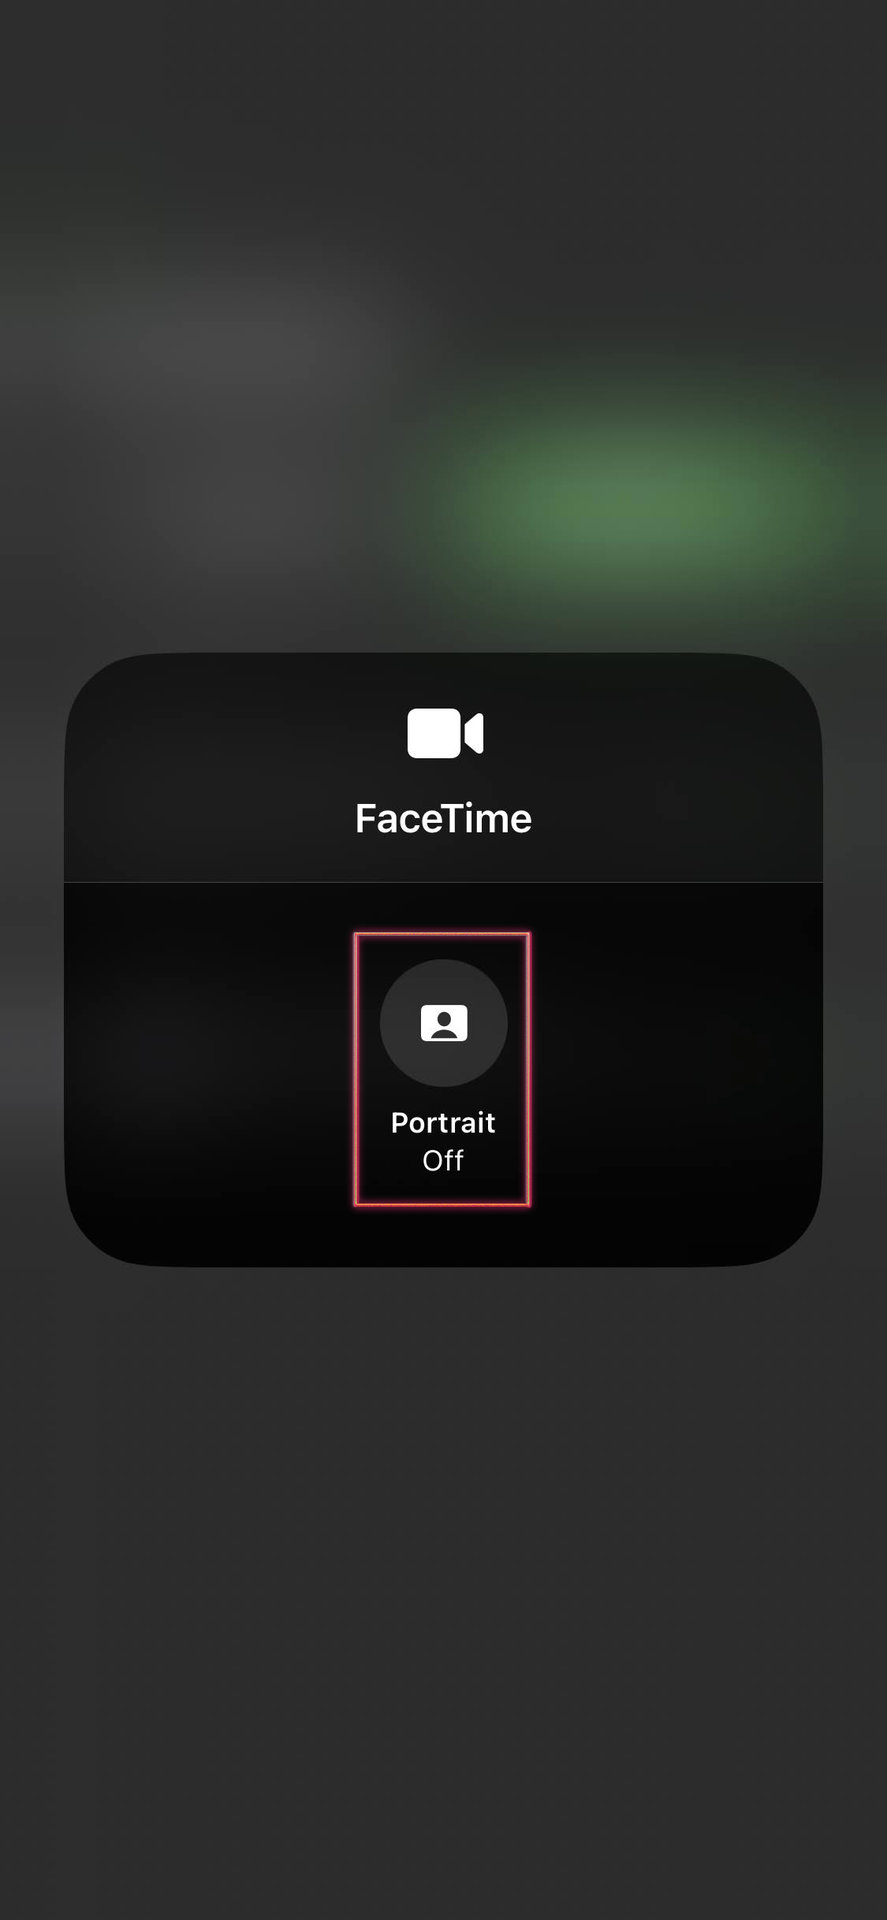 Turn on Facetime portrait mode from the Control Center 3